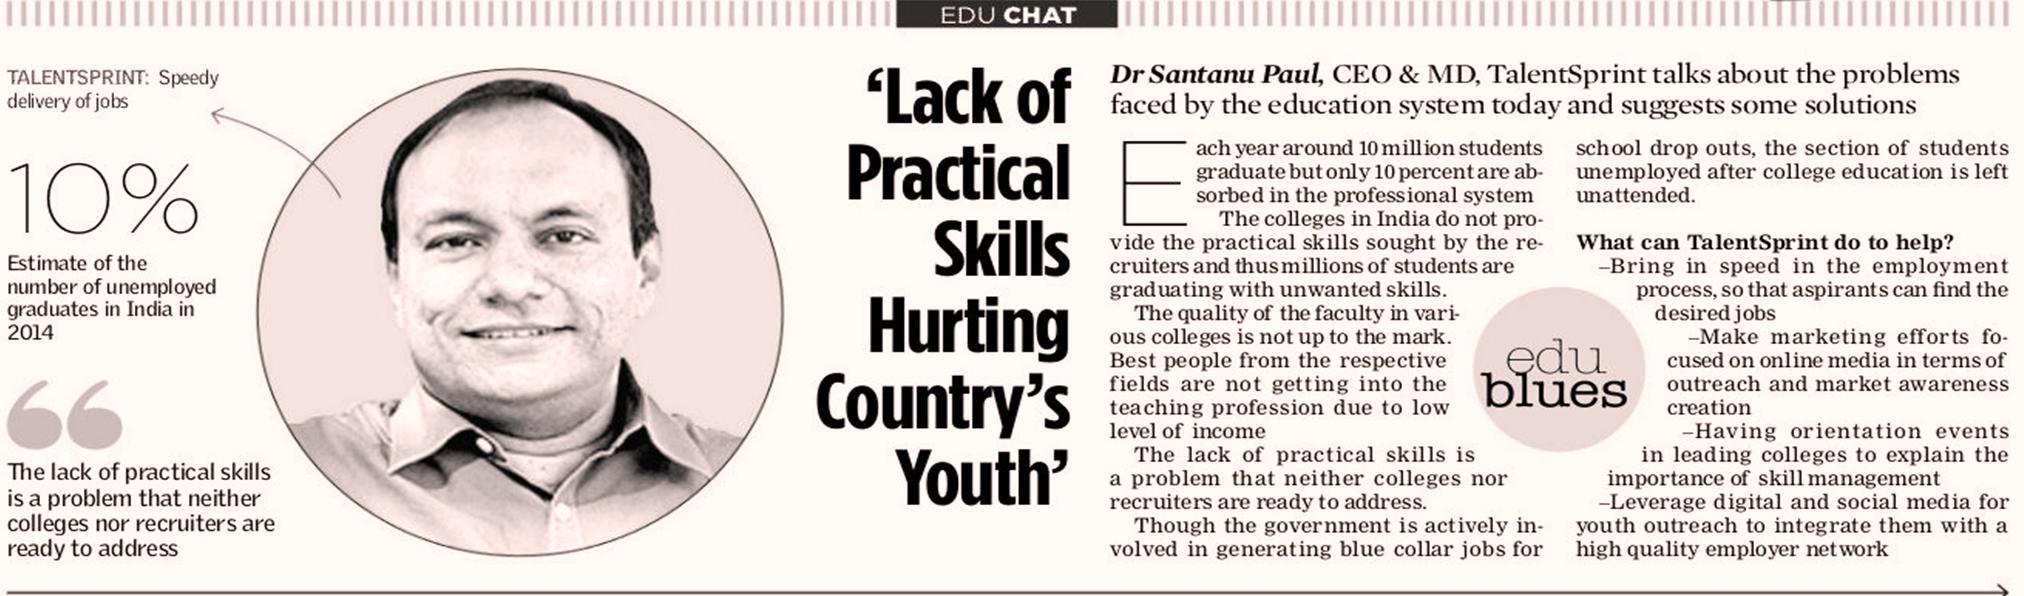 Lack of Practiacl Skills Hurting Country's Youth